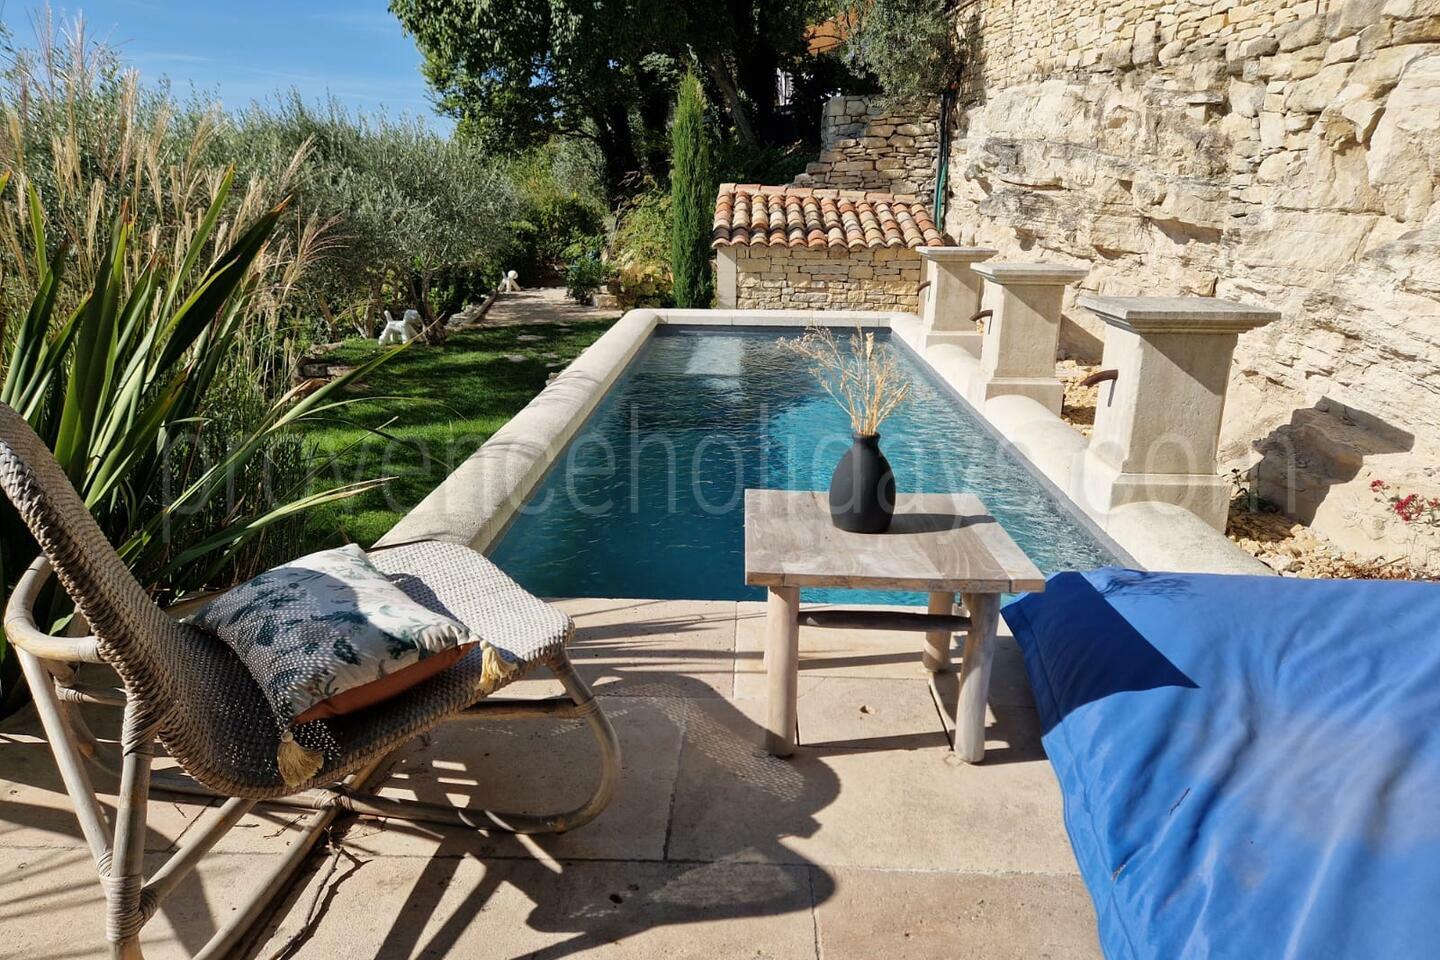 Charming cottages with spa and view on the valley 1 - La Roque sur Pernes: Villa: Pool - Swimming Pool